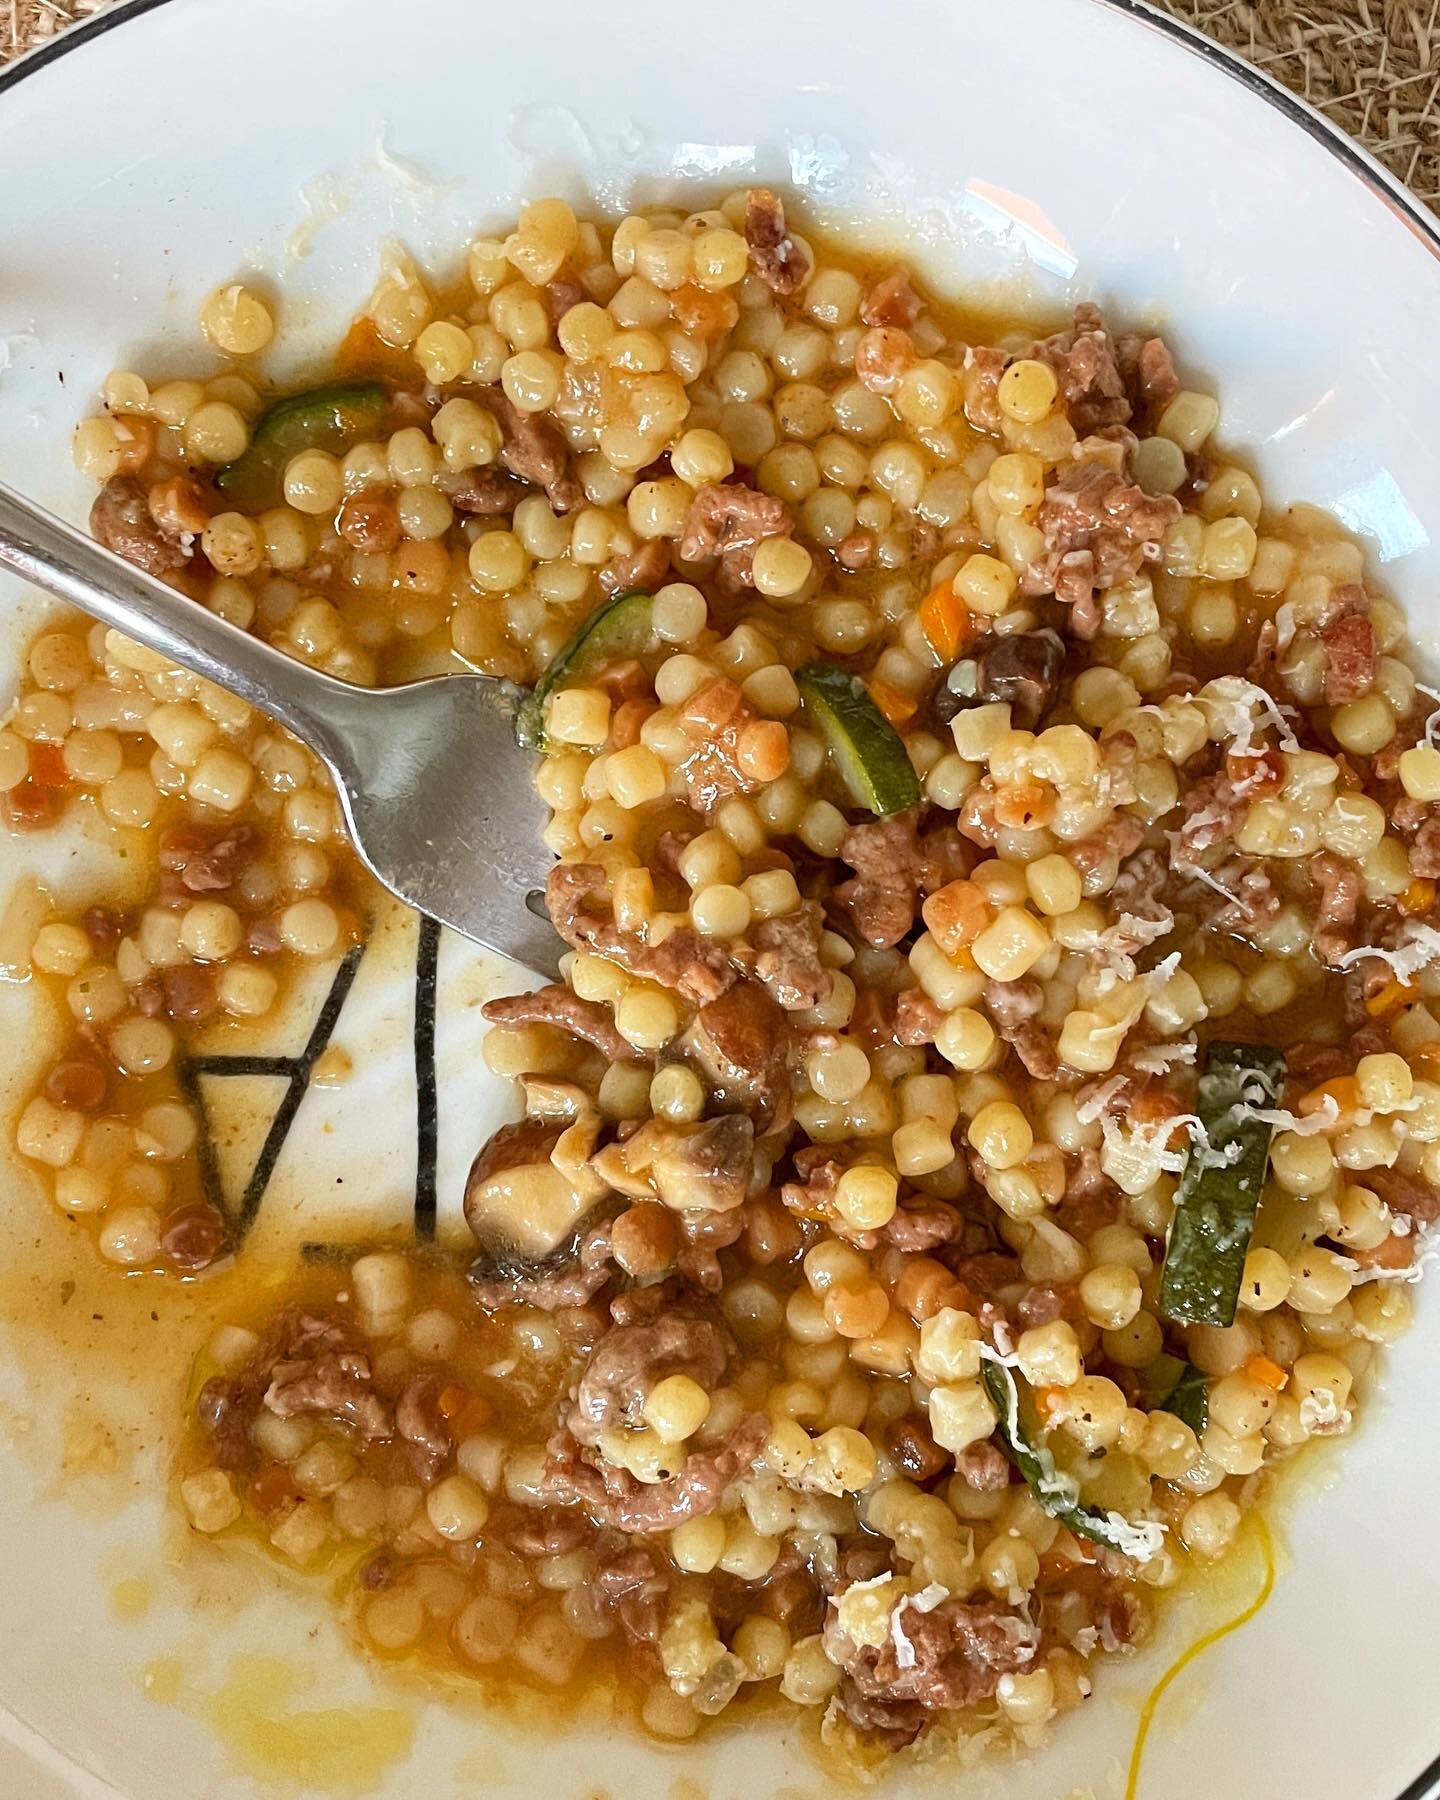 You ask, you get! Here's the recipe for tonight's fregola with lamb rag&ugrave; // serves 4 (+ 🫒)

Hit save so you can cook it another night, I will be as I forgot how I made it last time 🤣 

1 onion, finely chopped 
1 carrot, finely chopped 
1 cou